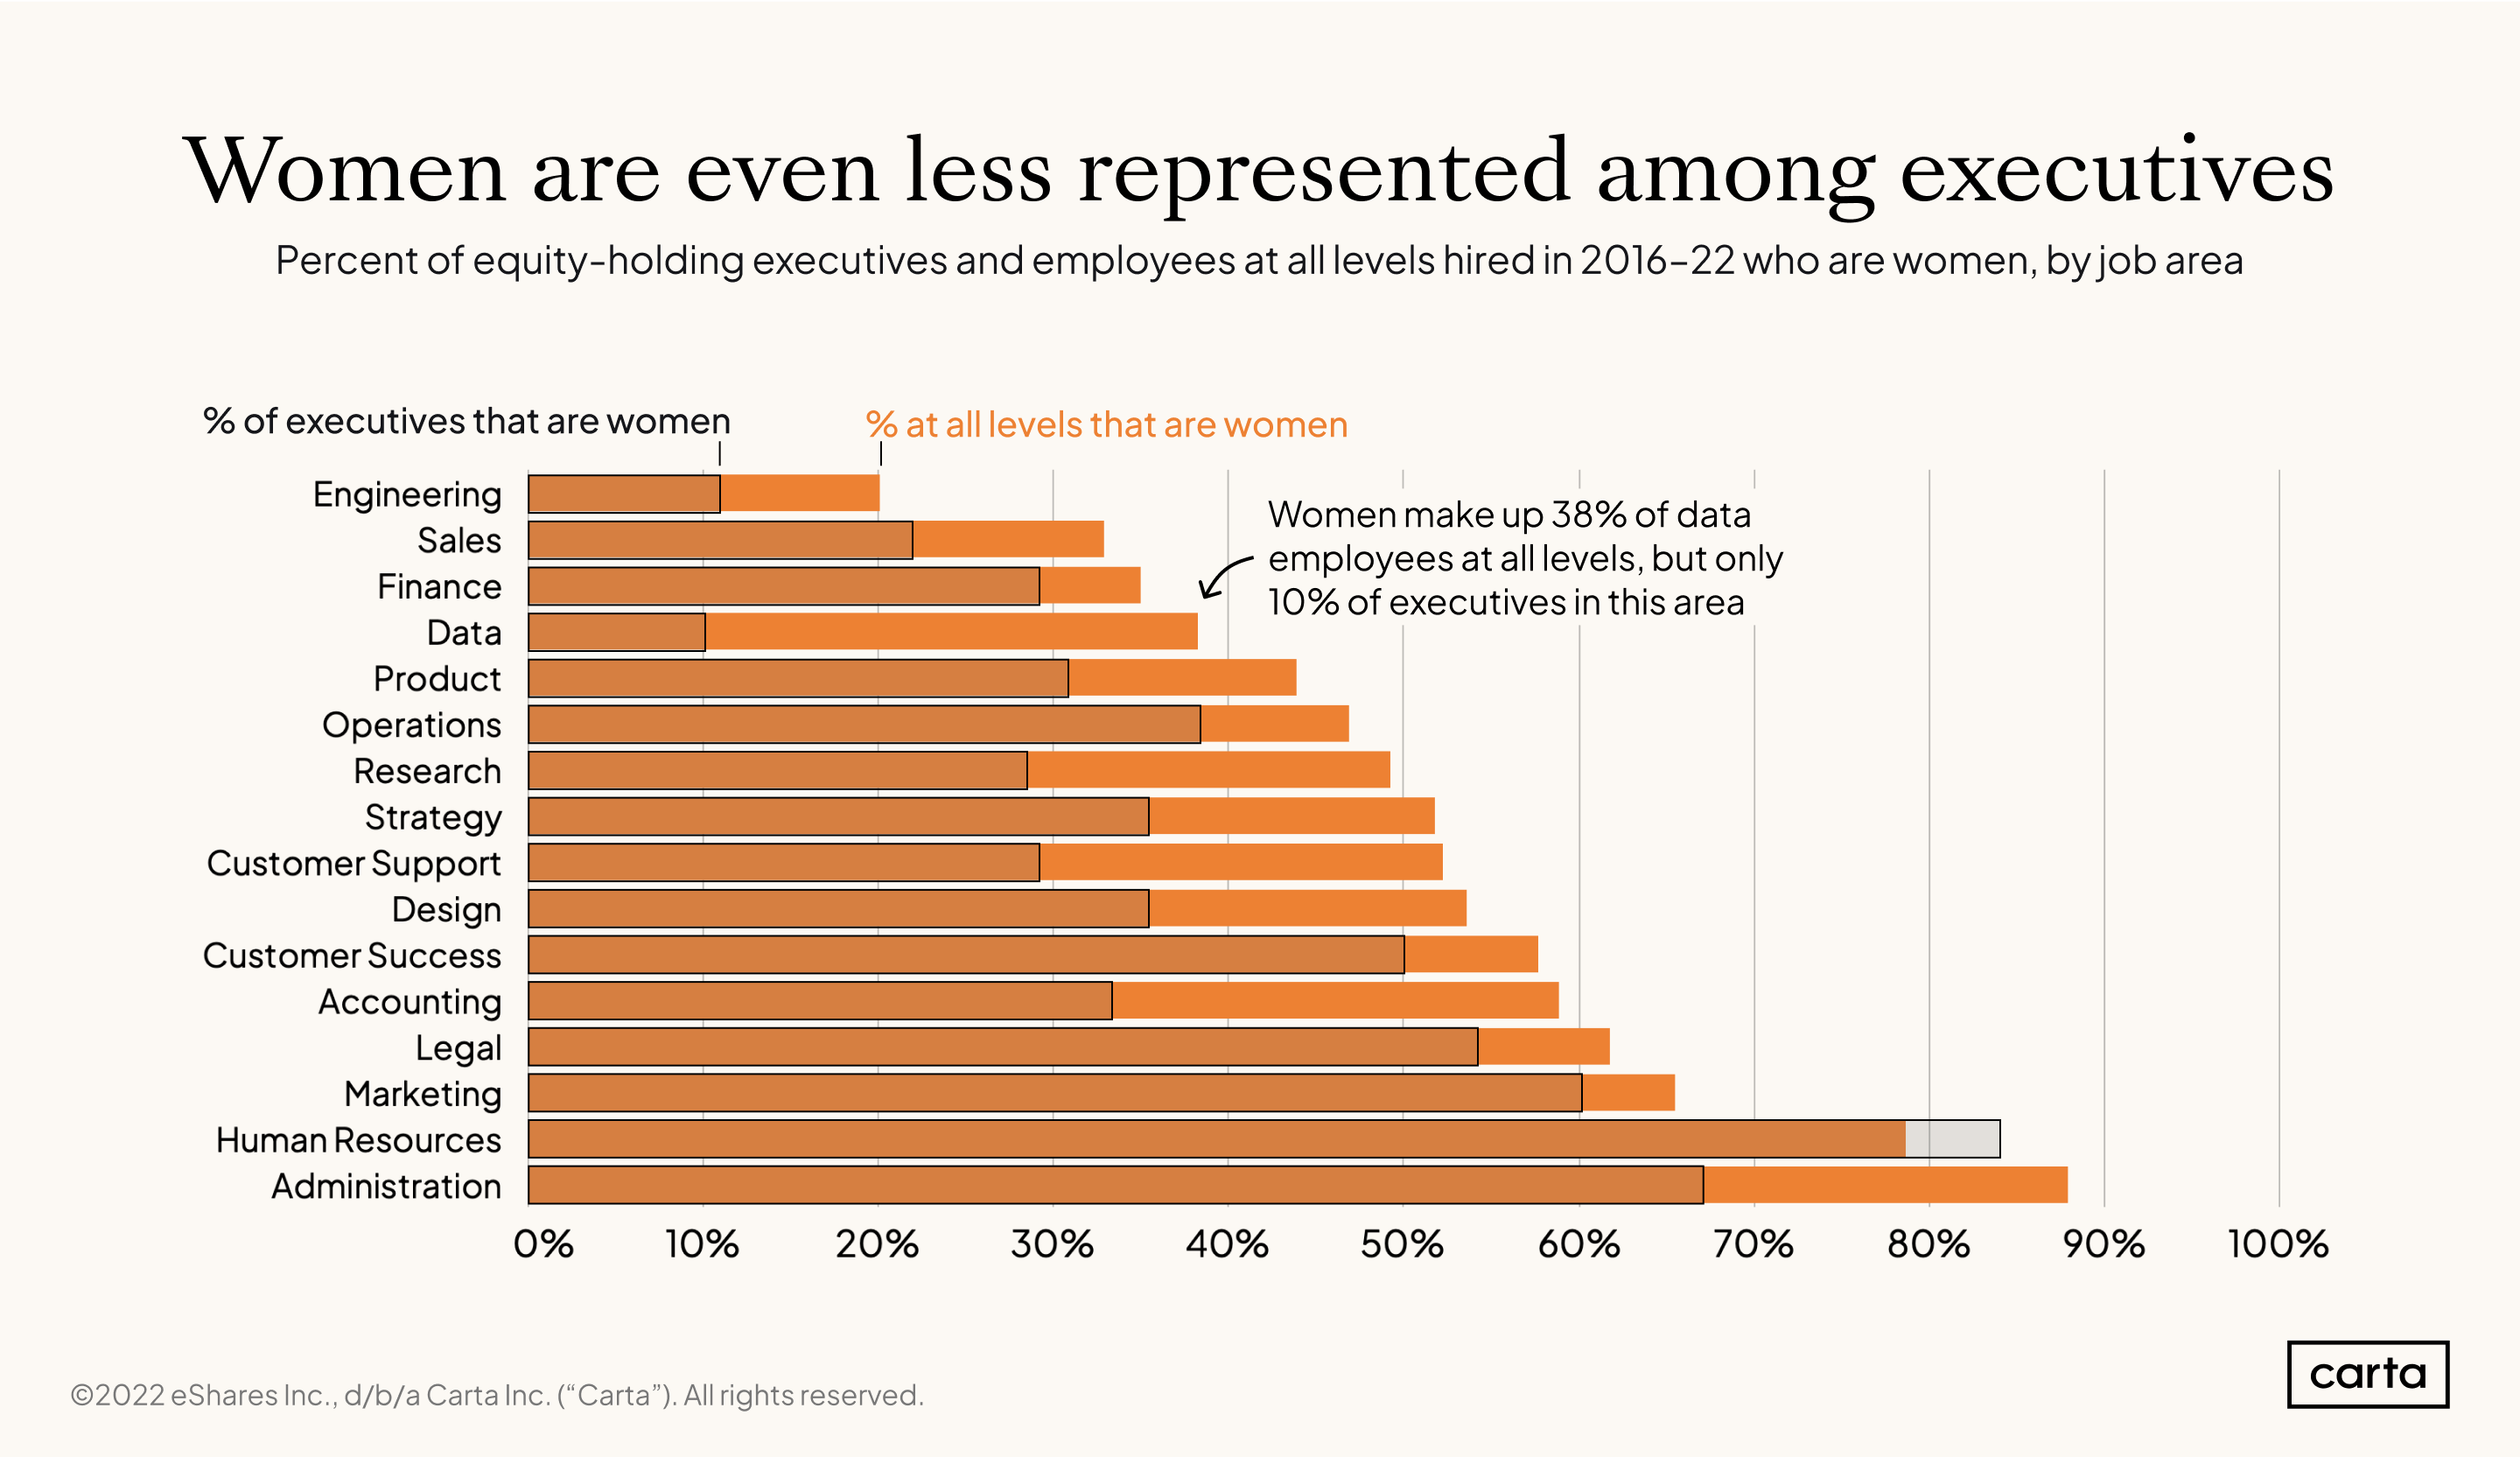 CES Gender by job area including executives